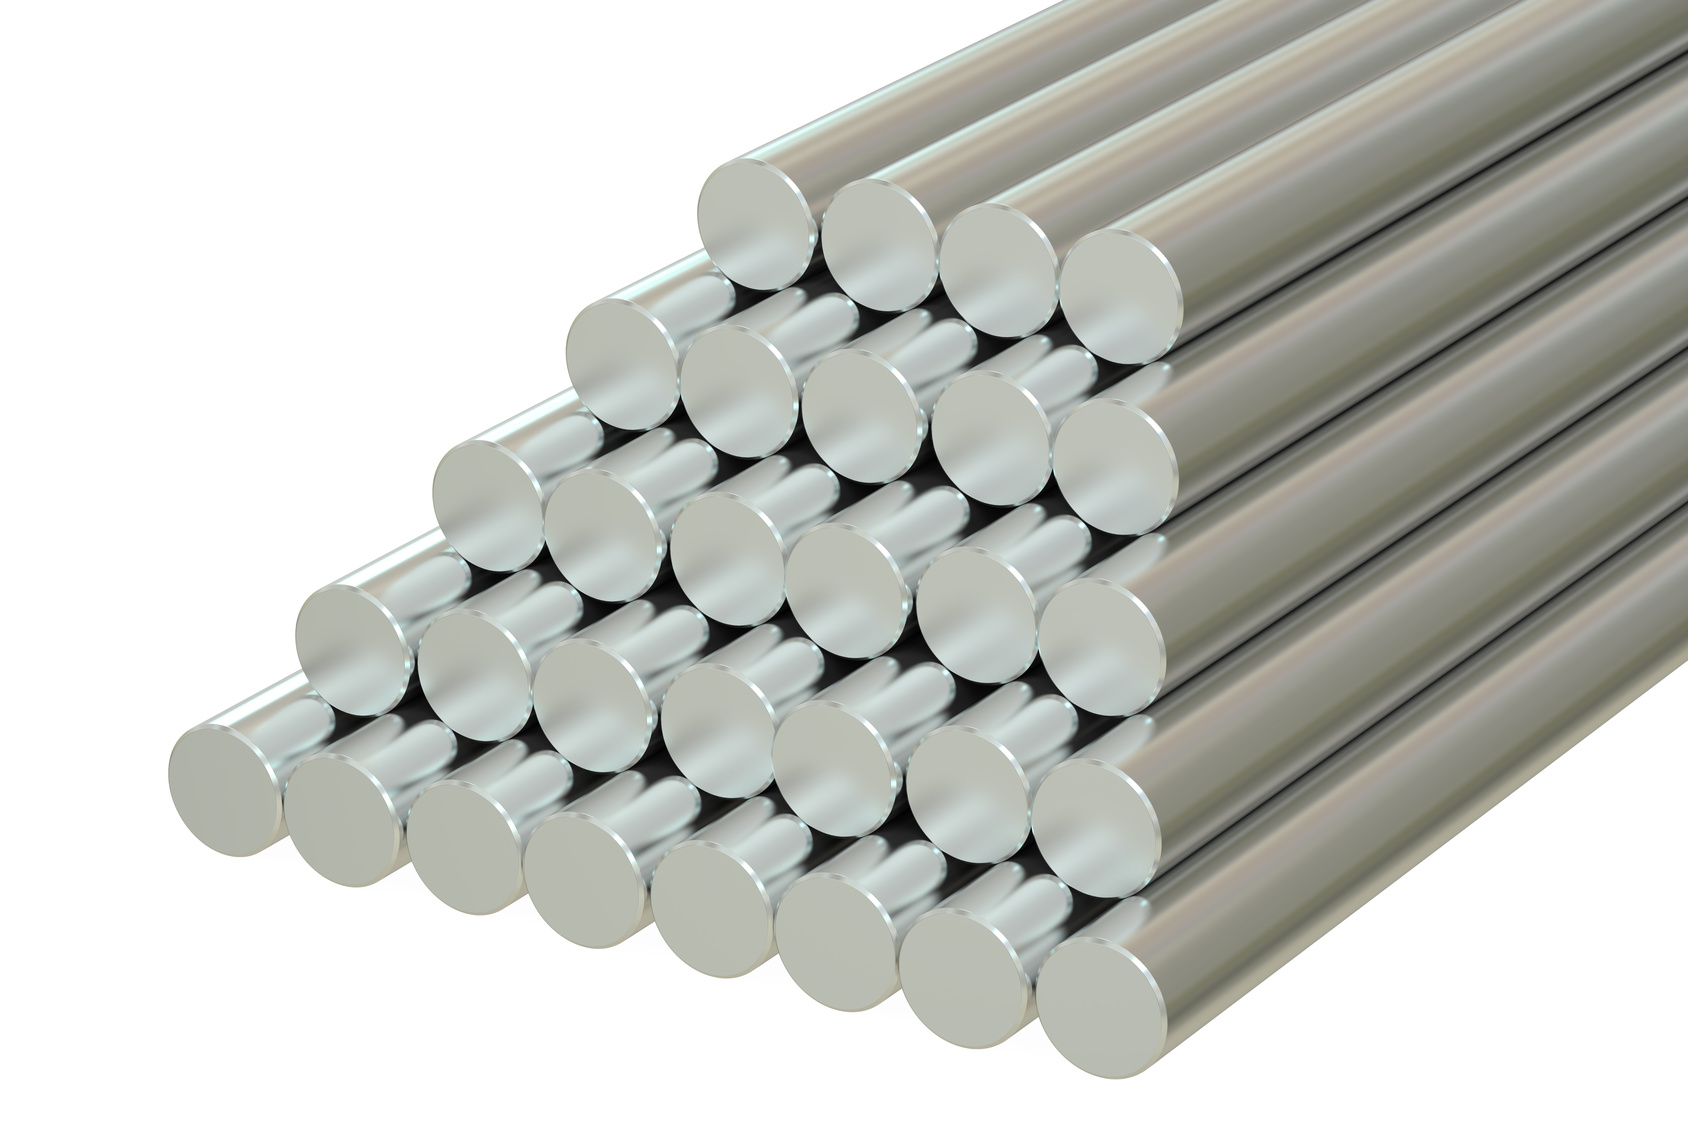 Rolled steel wires and plain bars